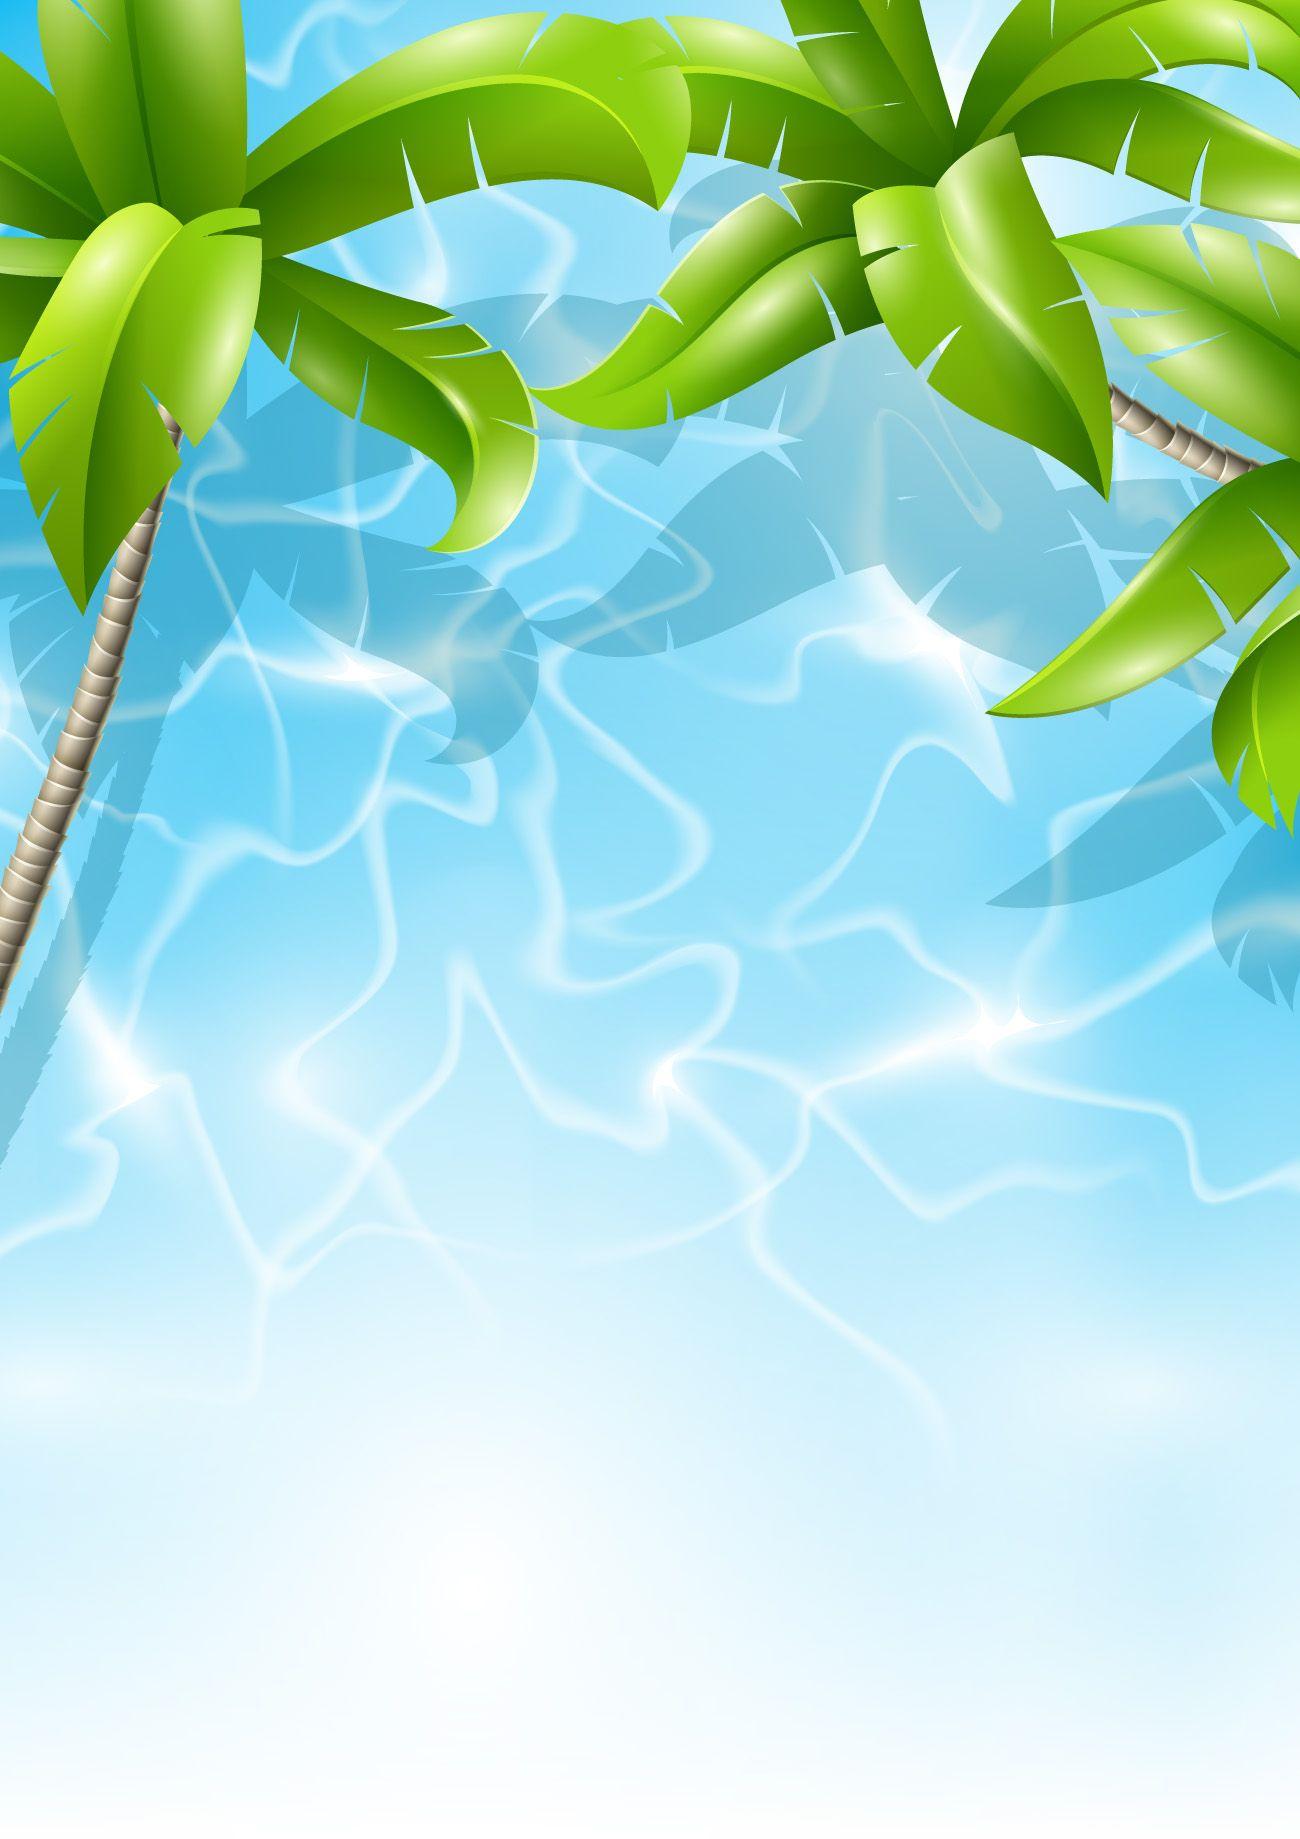 Beautiful Tropical Background vector 01 Background free